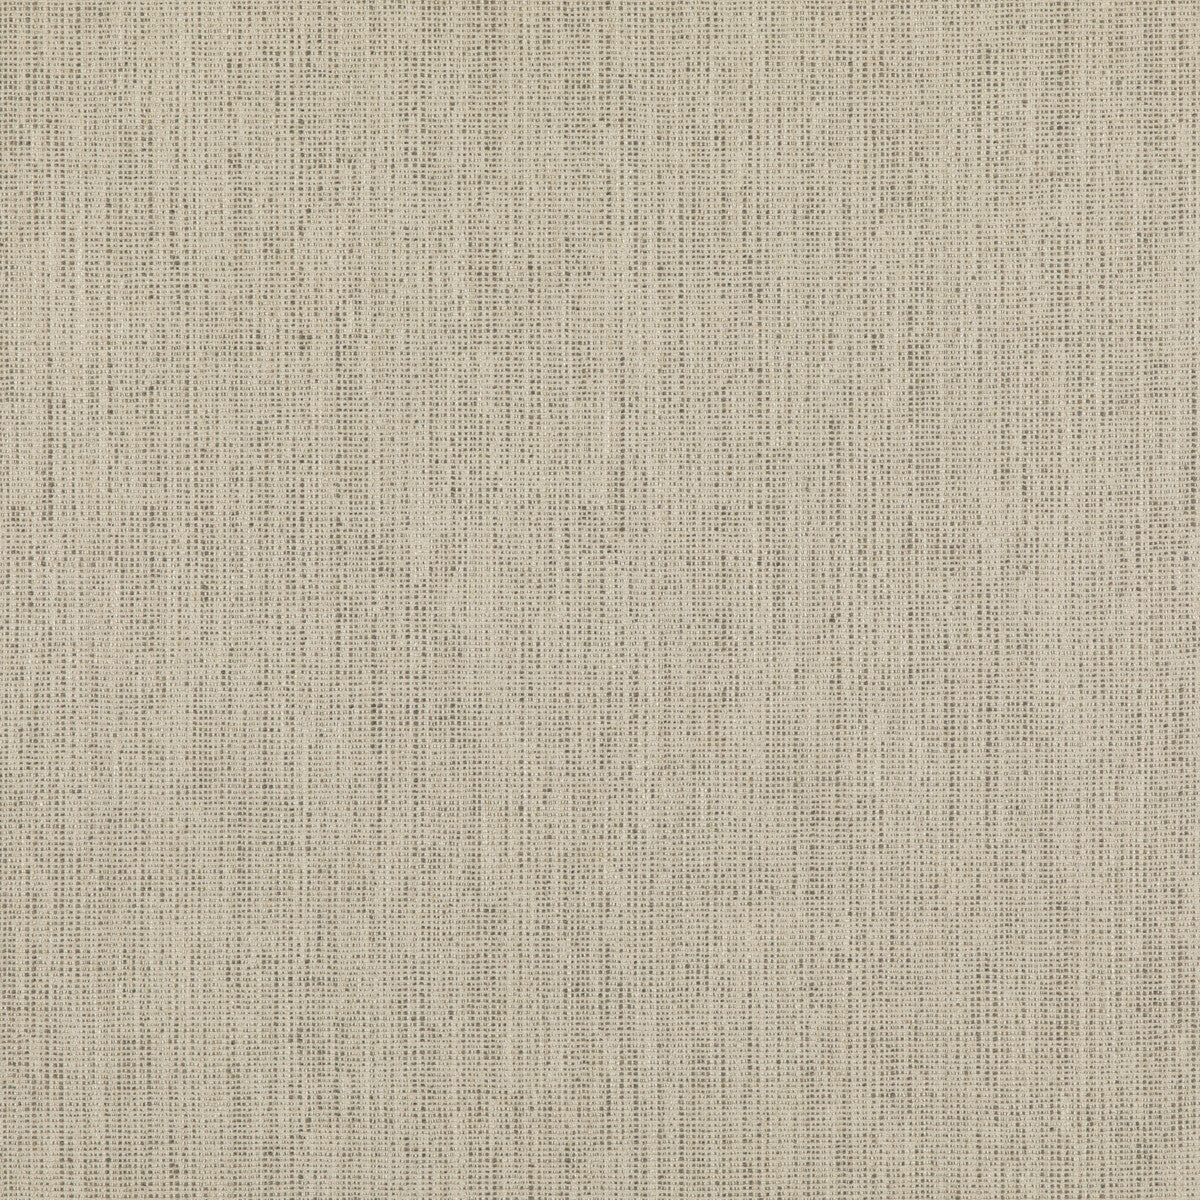 Stipple fabric in dove color - pattern ED85317.910.0 - by Threads in the Luxury Weaves II collection